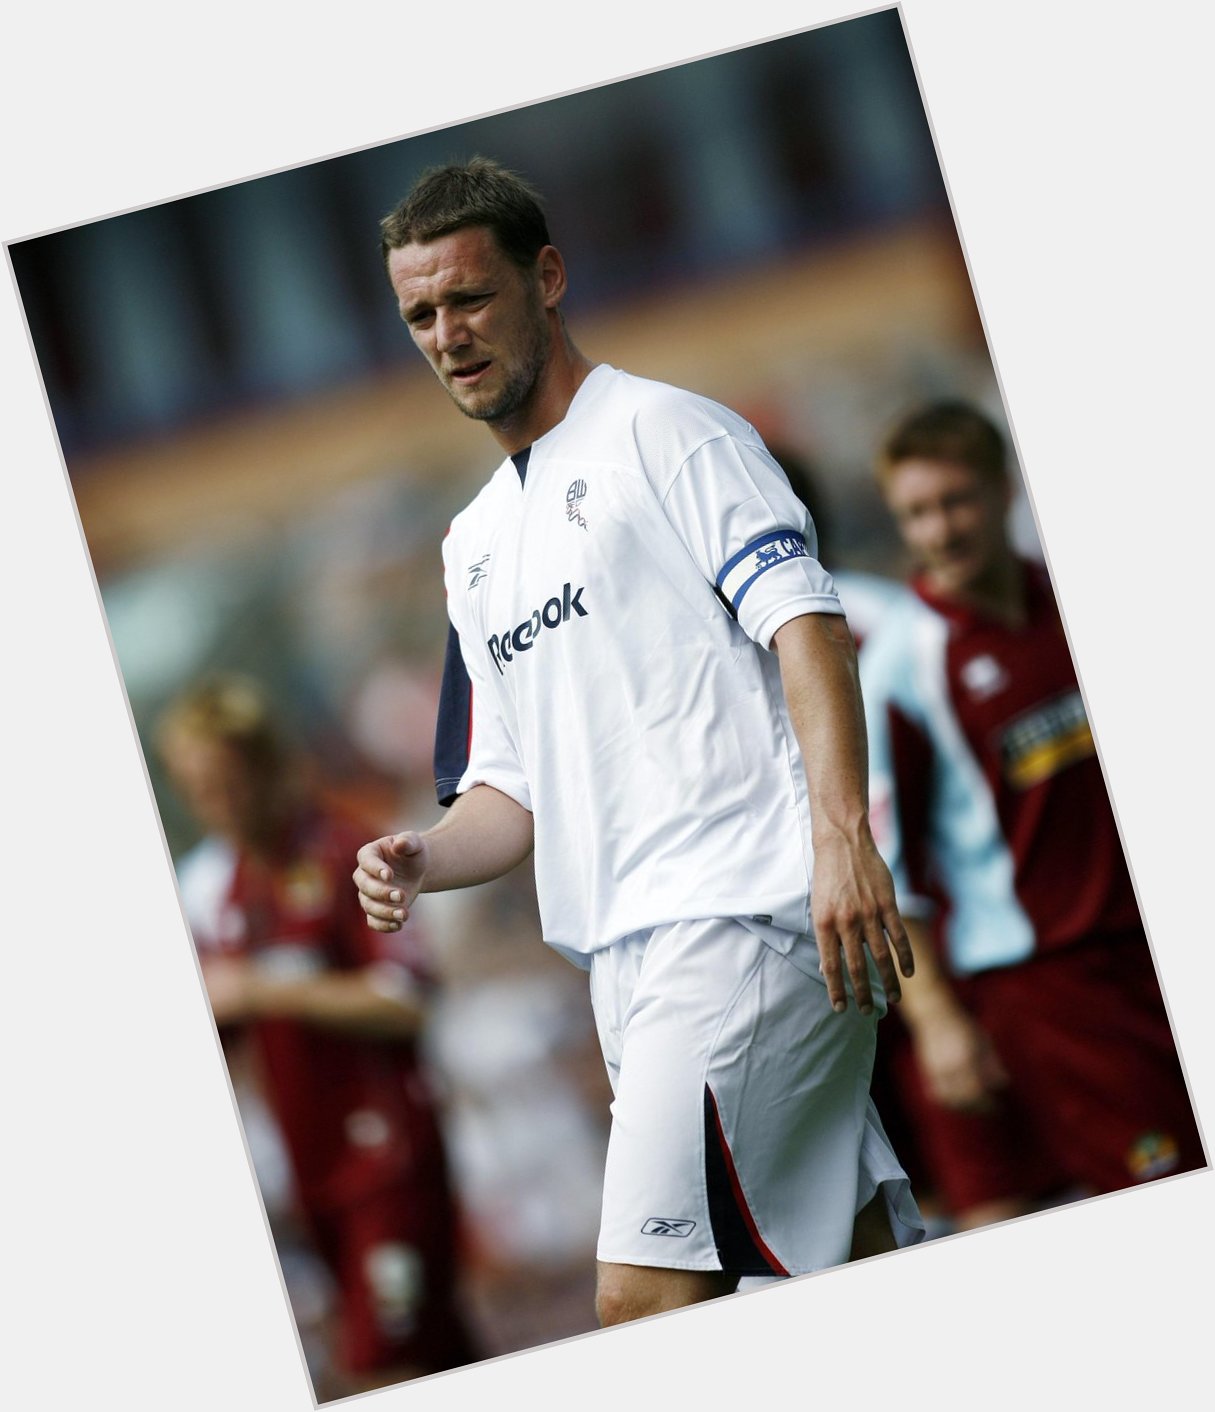 Many happy returns to former captain Kevin Nolan who celebrates his 33rd birthday today! 